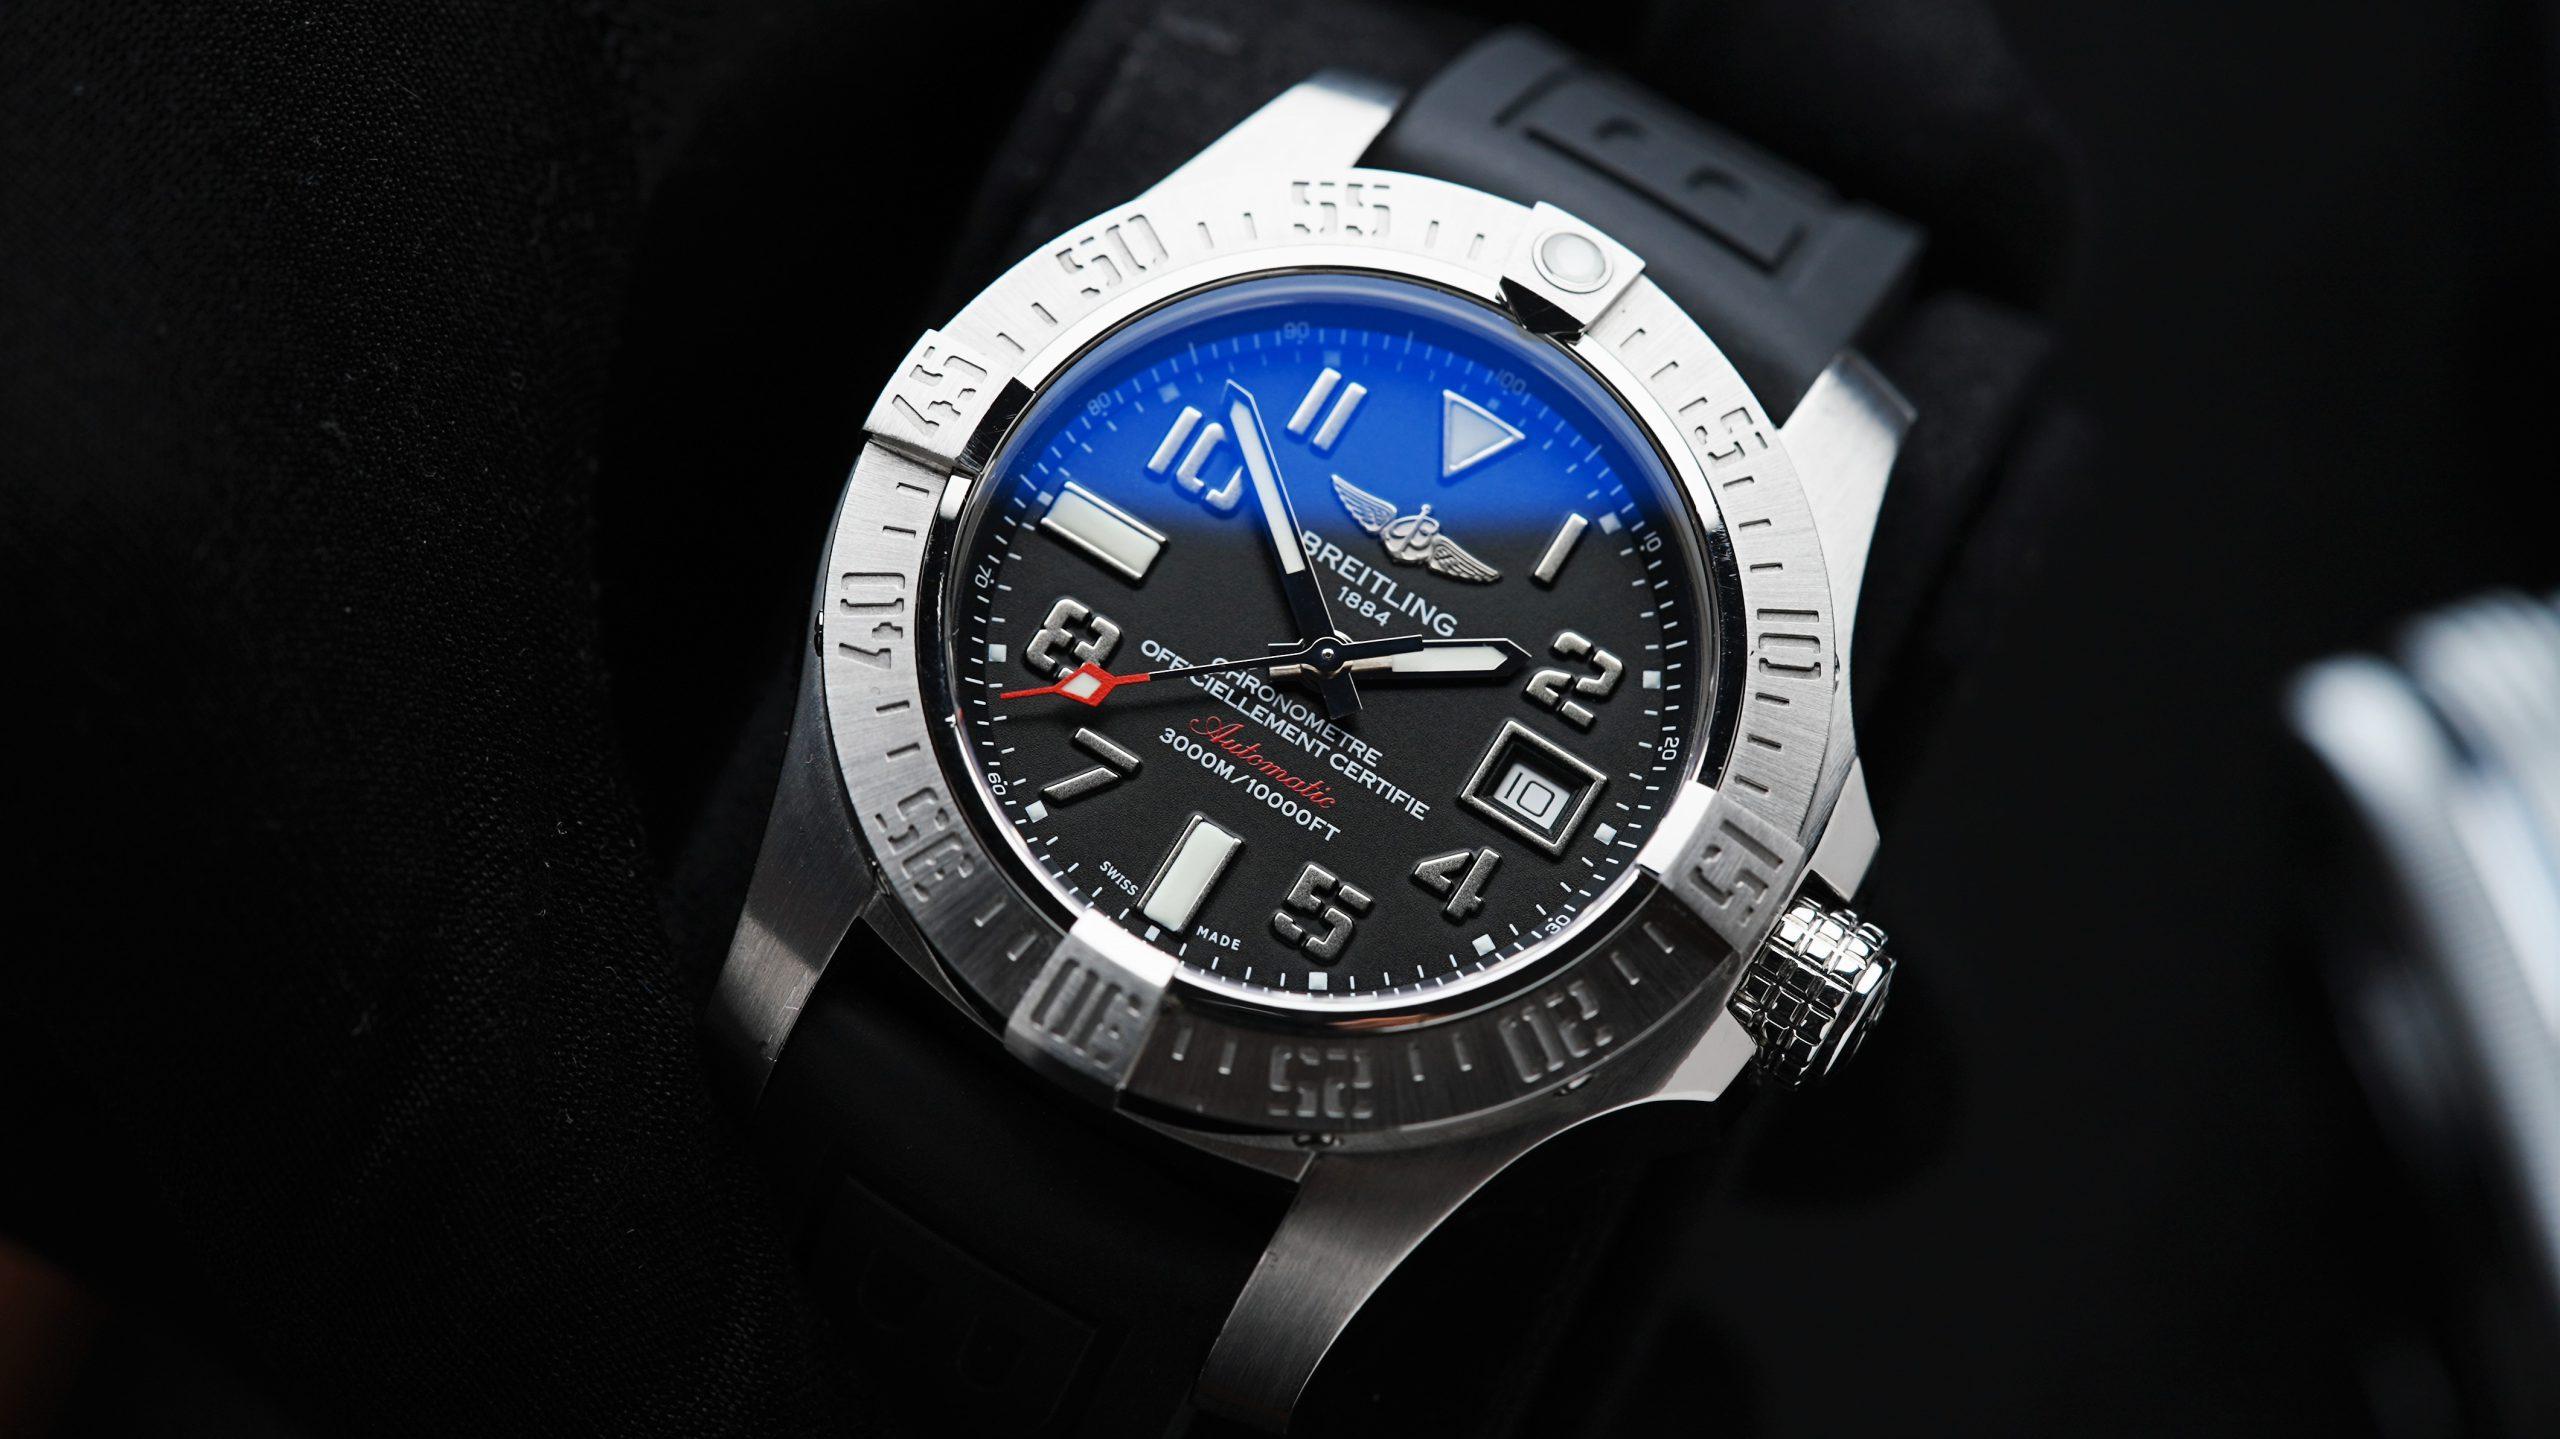 Breitling Avenger II Seawolf angled shot up close of dial.